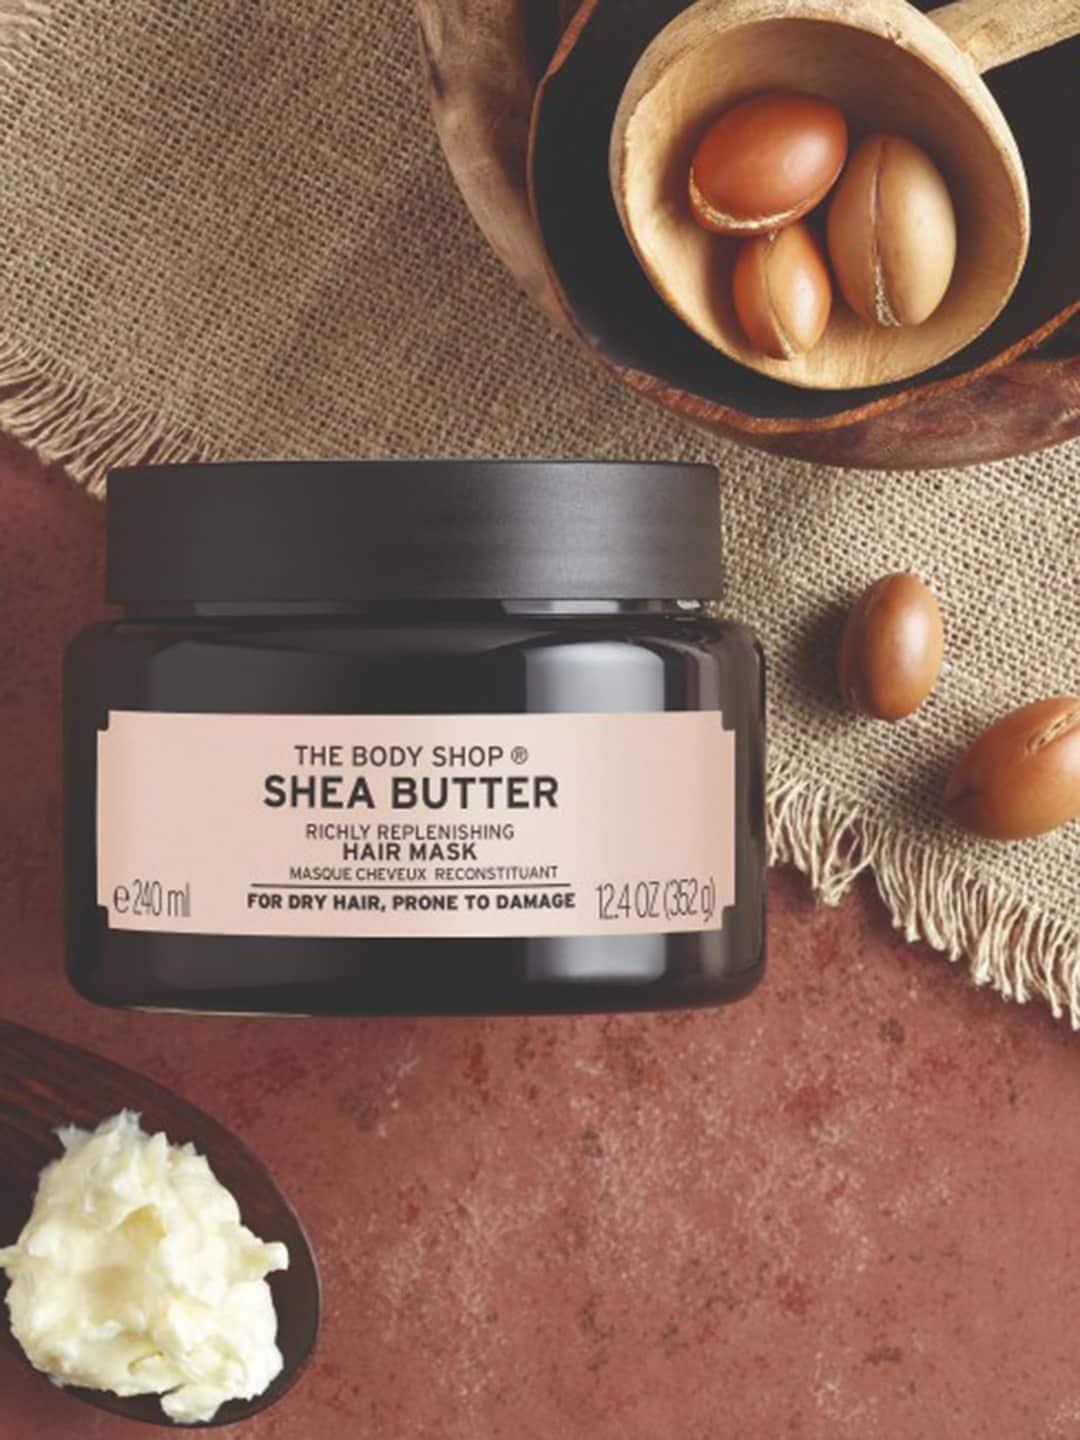 THE BODY SHOP Shea Butter Richly Replenishing Sustainable Hair Mask 240ml Price in India